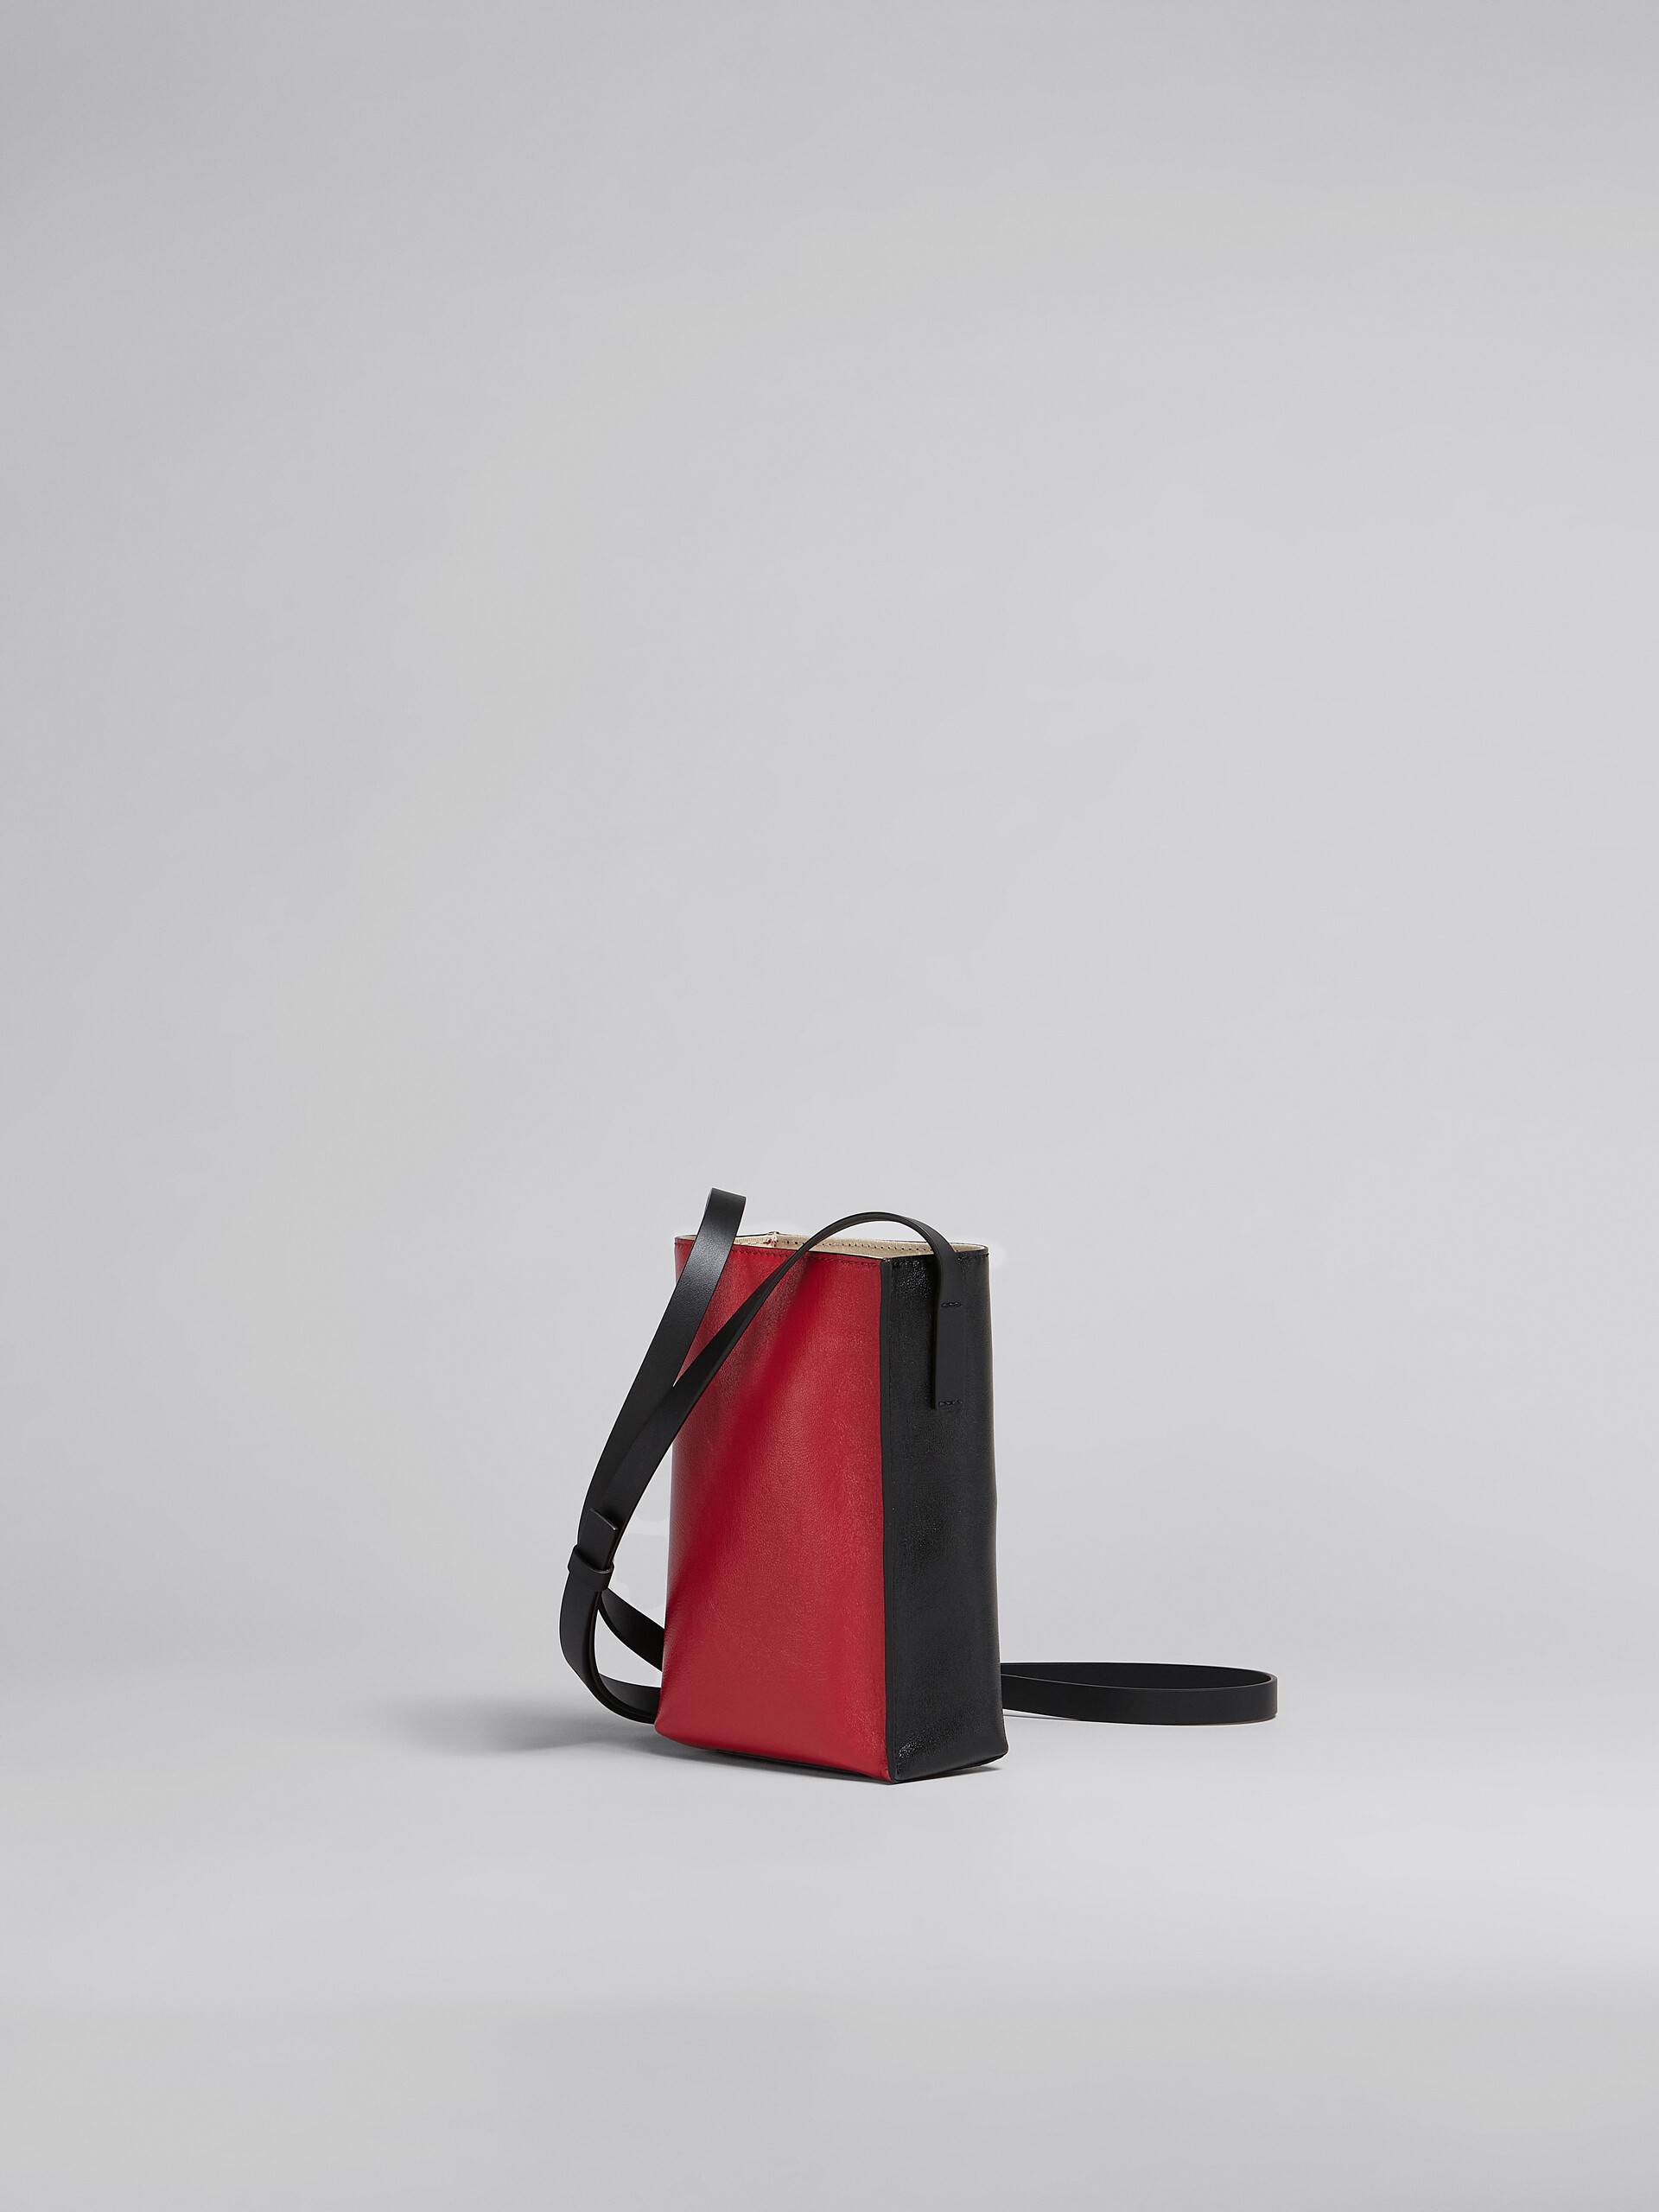 Museo Soft Small Bag in black and red leather - Shoulder Bag - Image 3